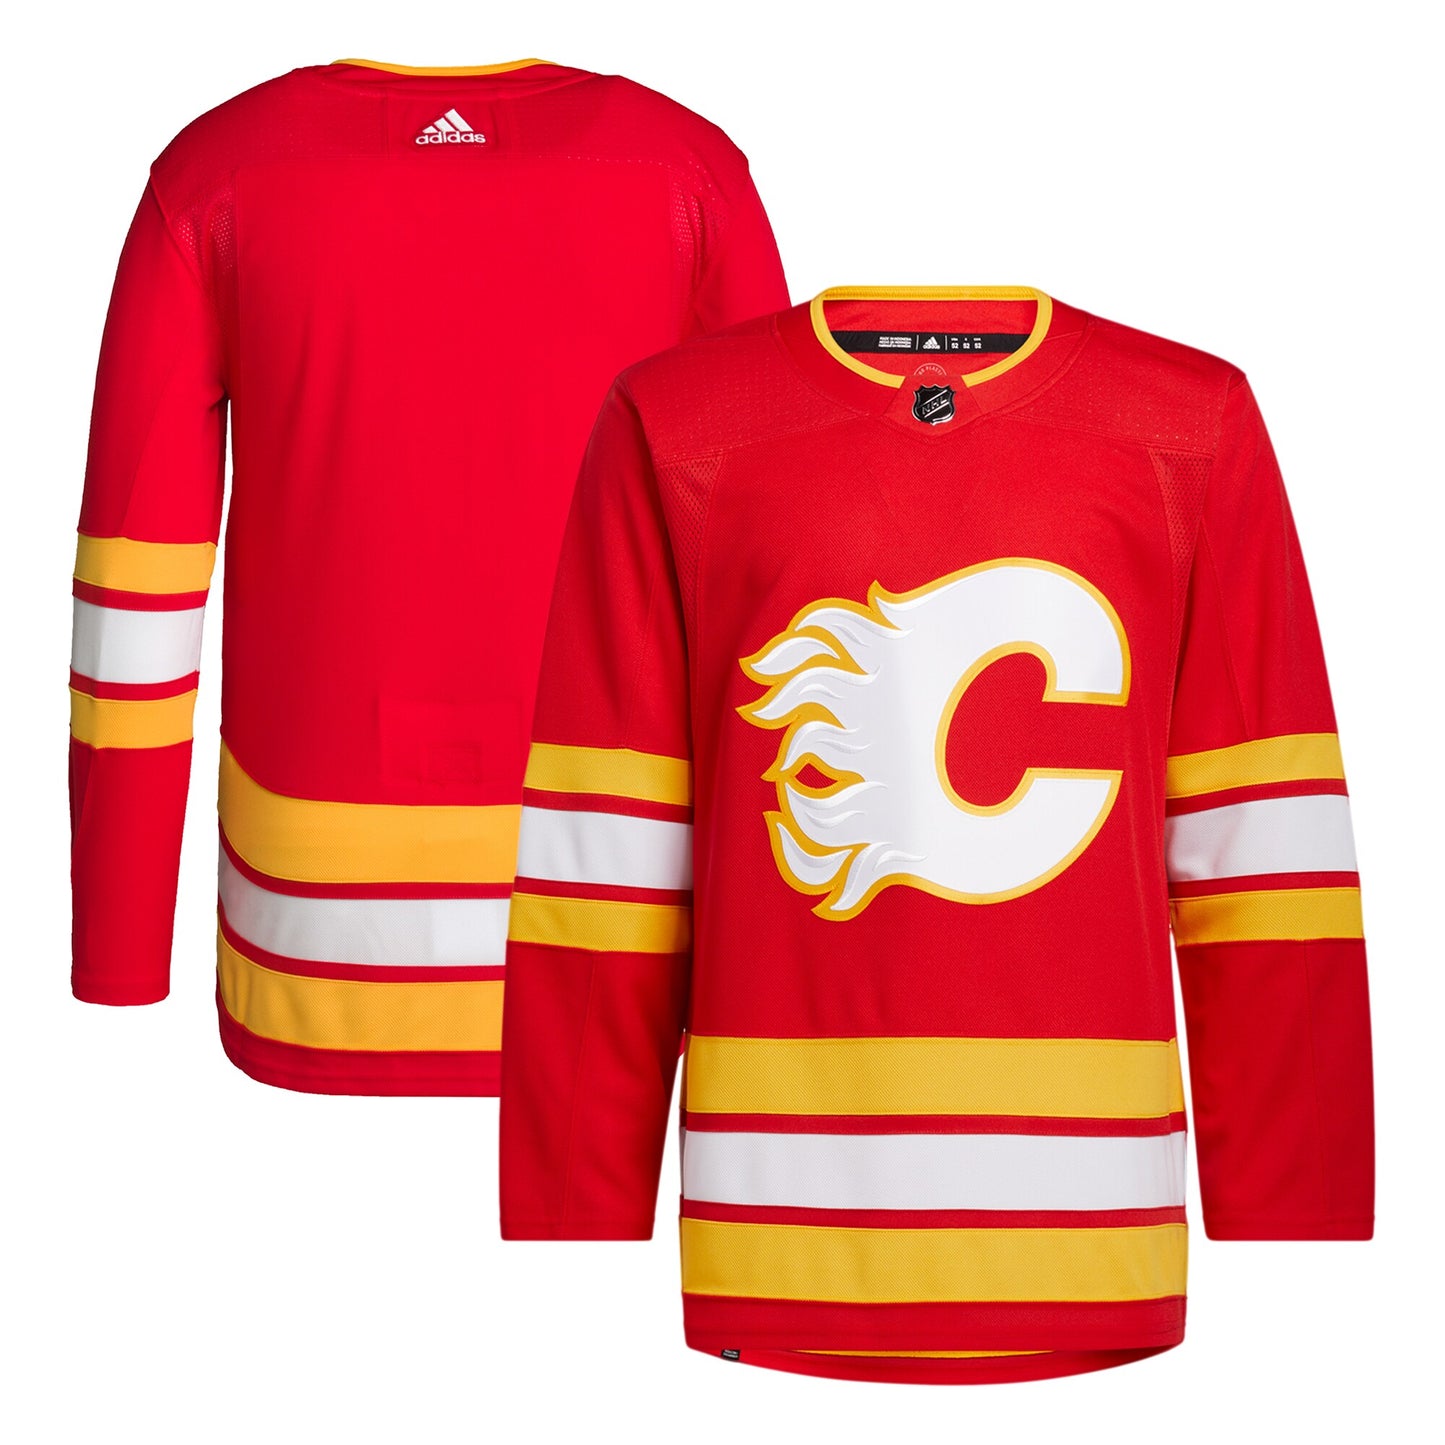 Calgary Flames adidas 2020/21 Home Primegreen Authentic Pro Jersey - Red